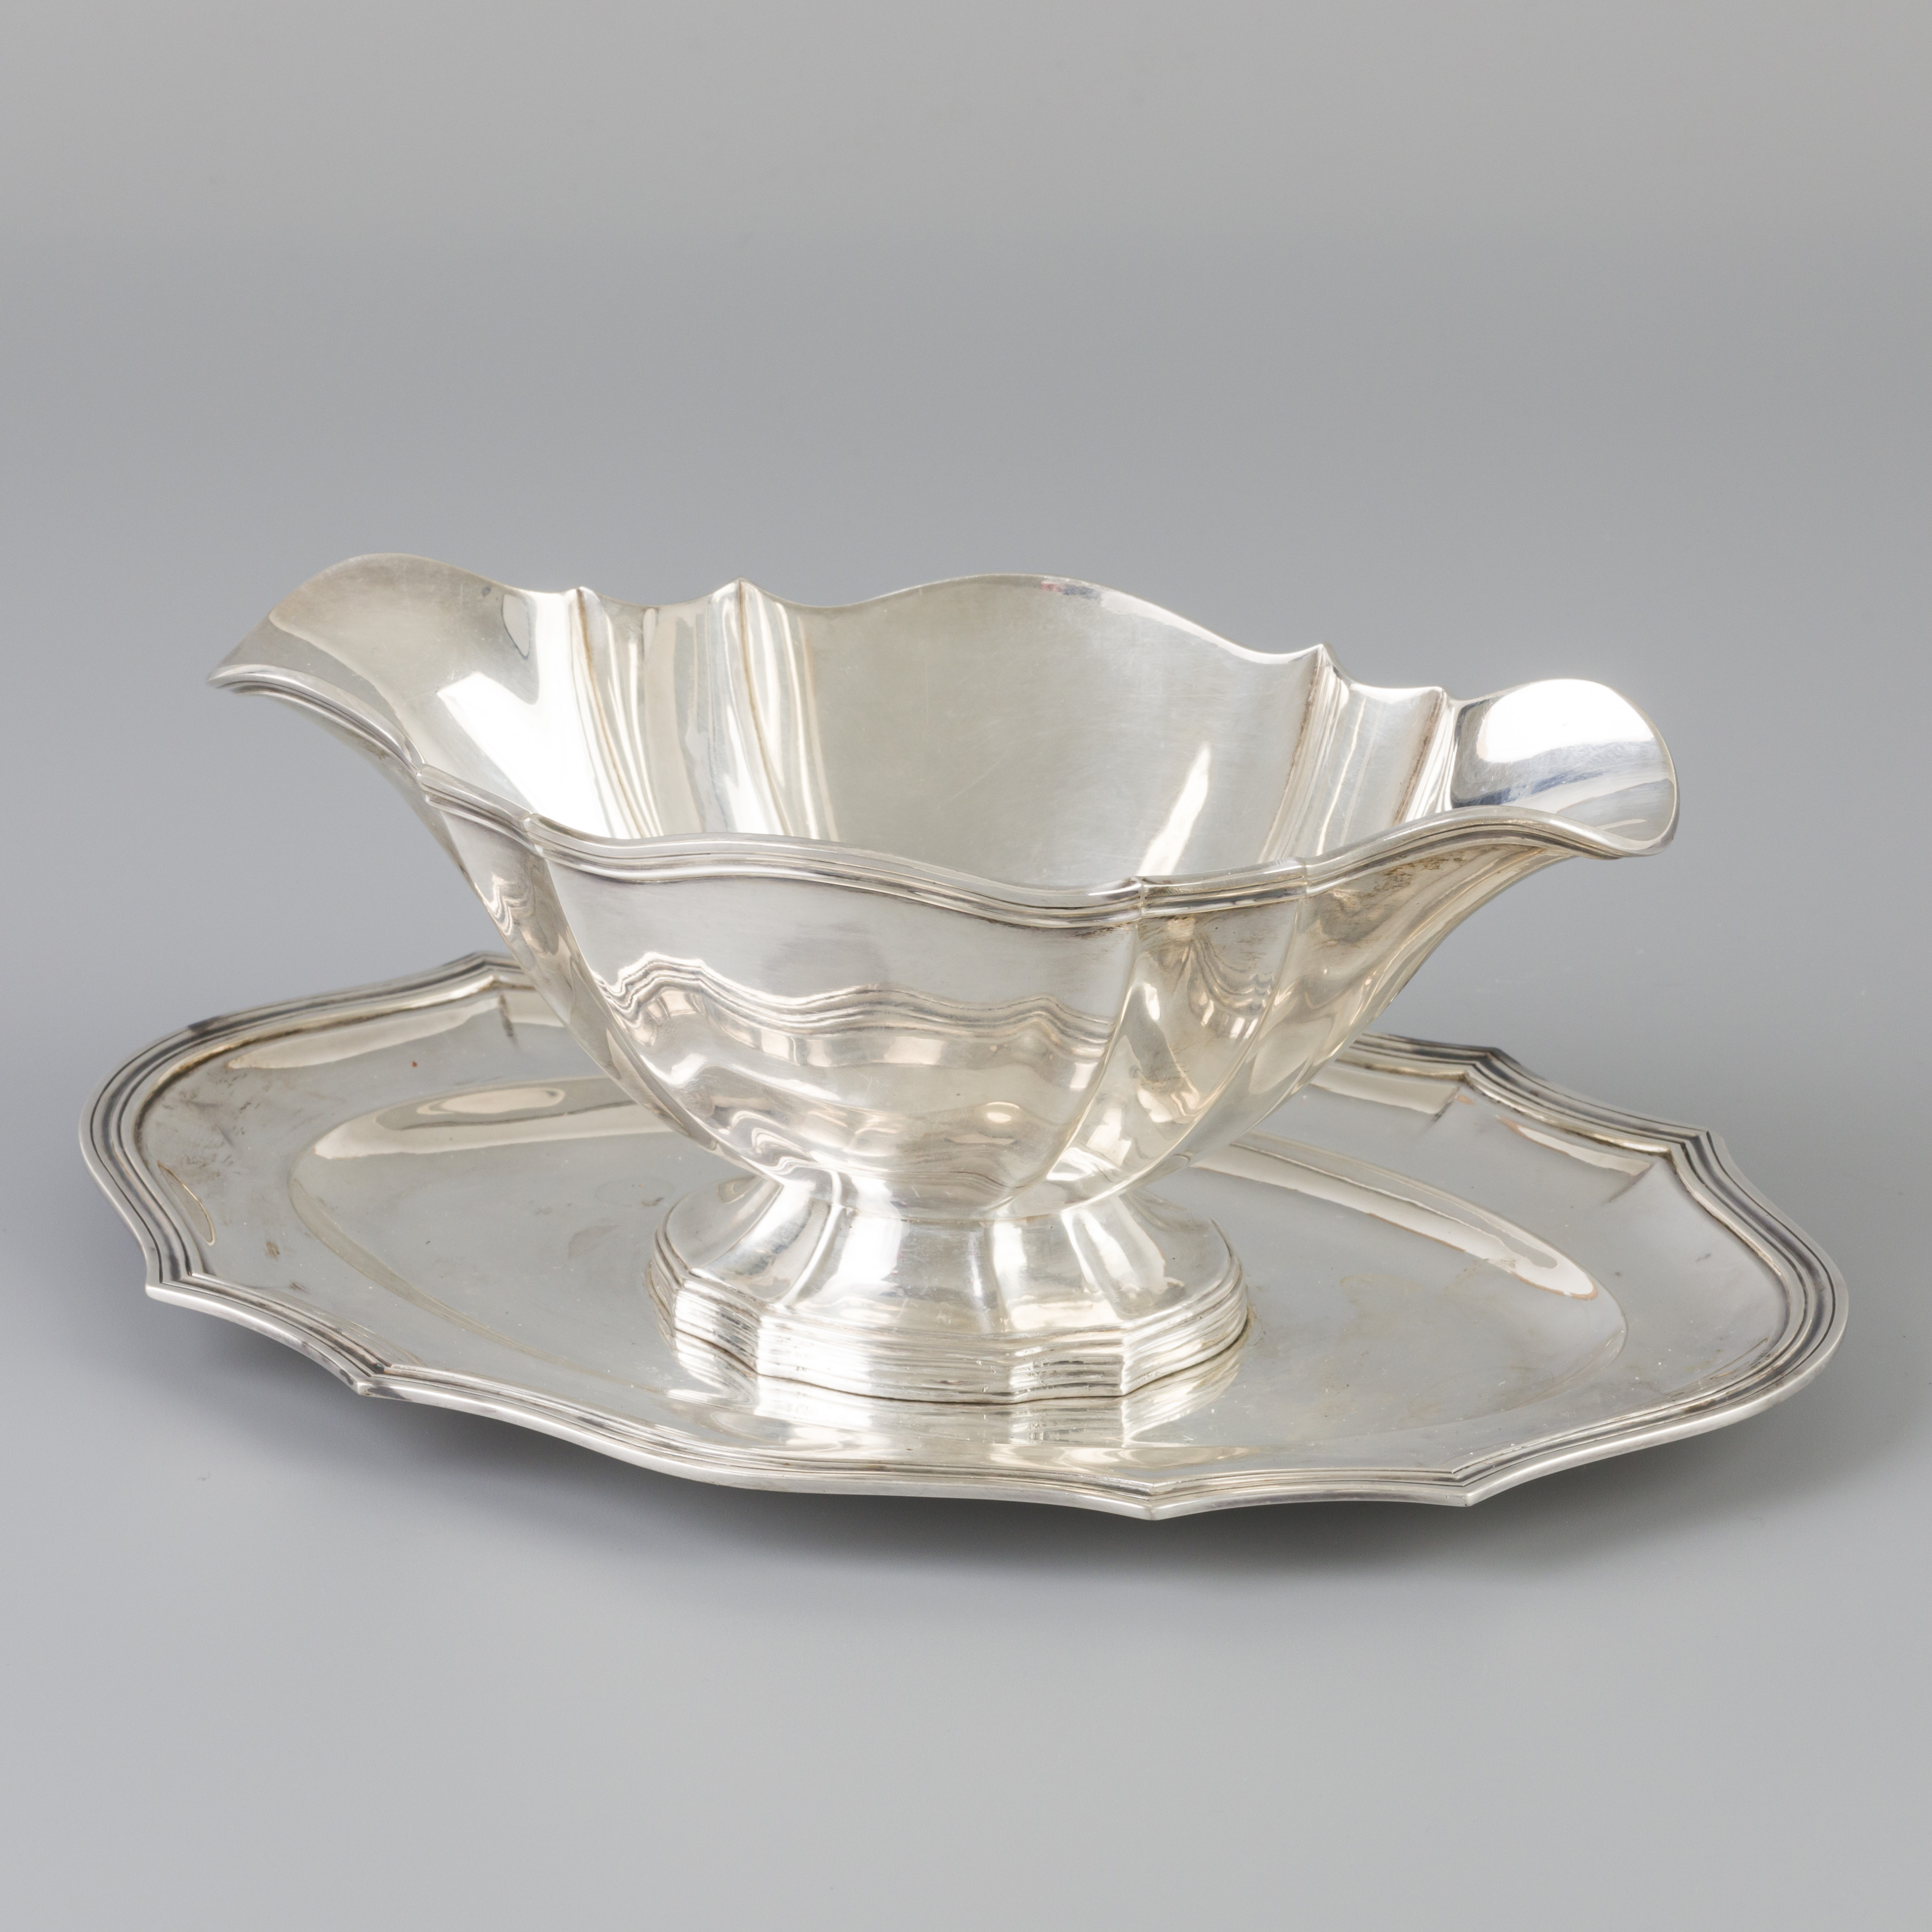 Sauce boat with silver saucer.